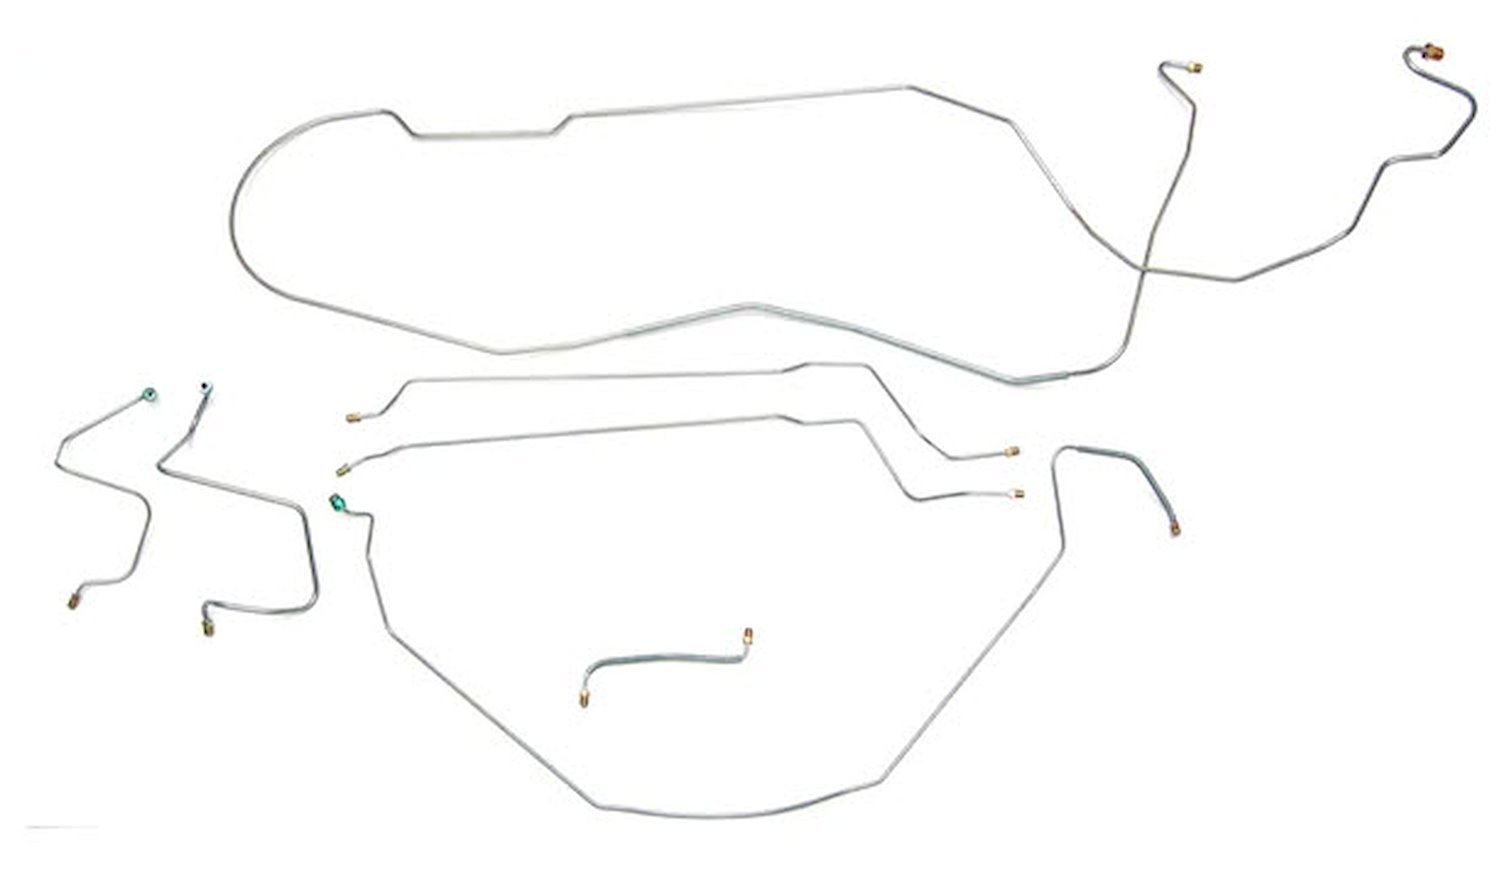 Complete Brake Line Set for 1967 Chevy Chevelle, Malibu Hardtop with Manual Drum Brakes [Stainless Steel]